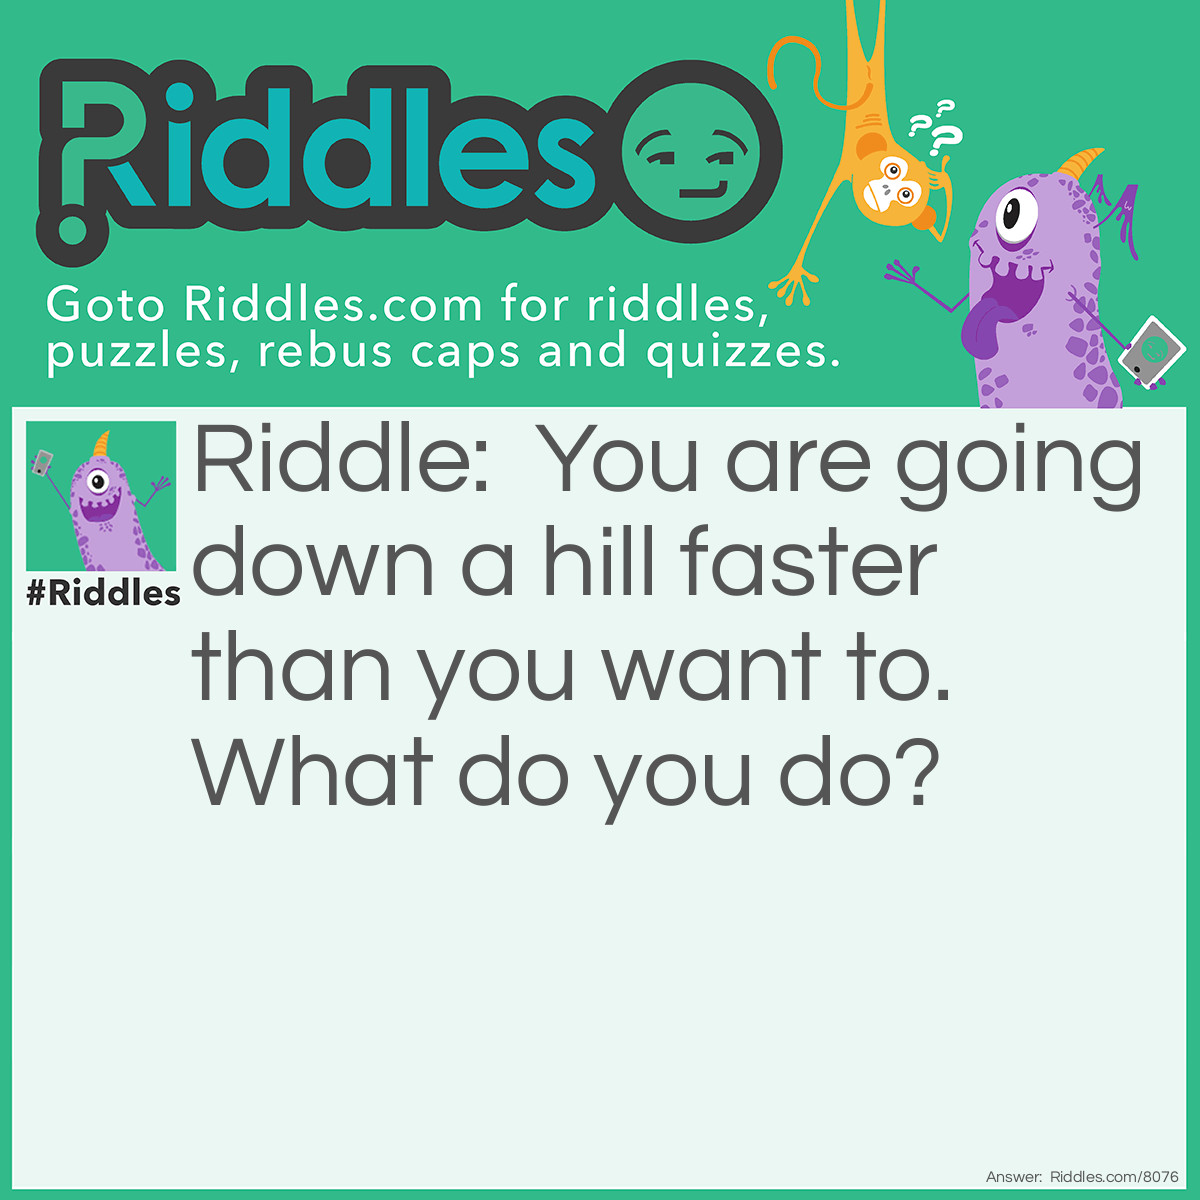 Riddle: You are going down a hill faster than you want to. What do you do? Answer: Put your feet on the ground.